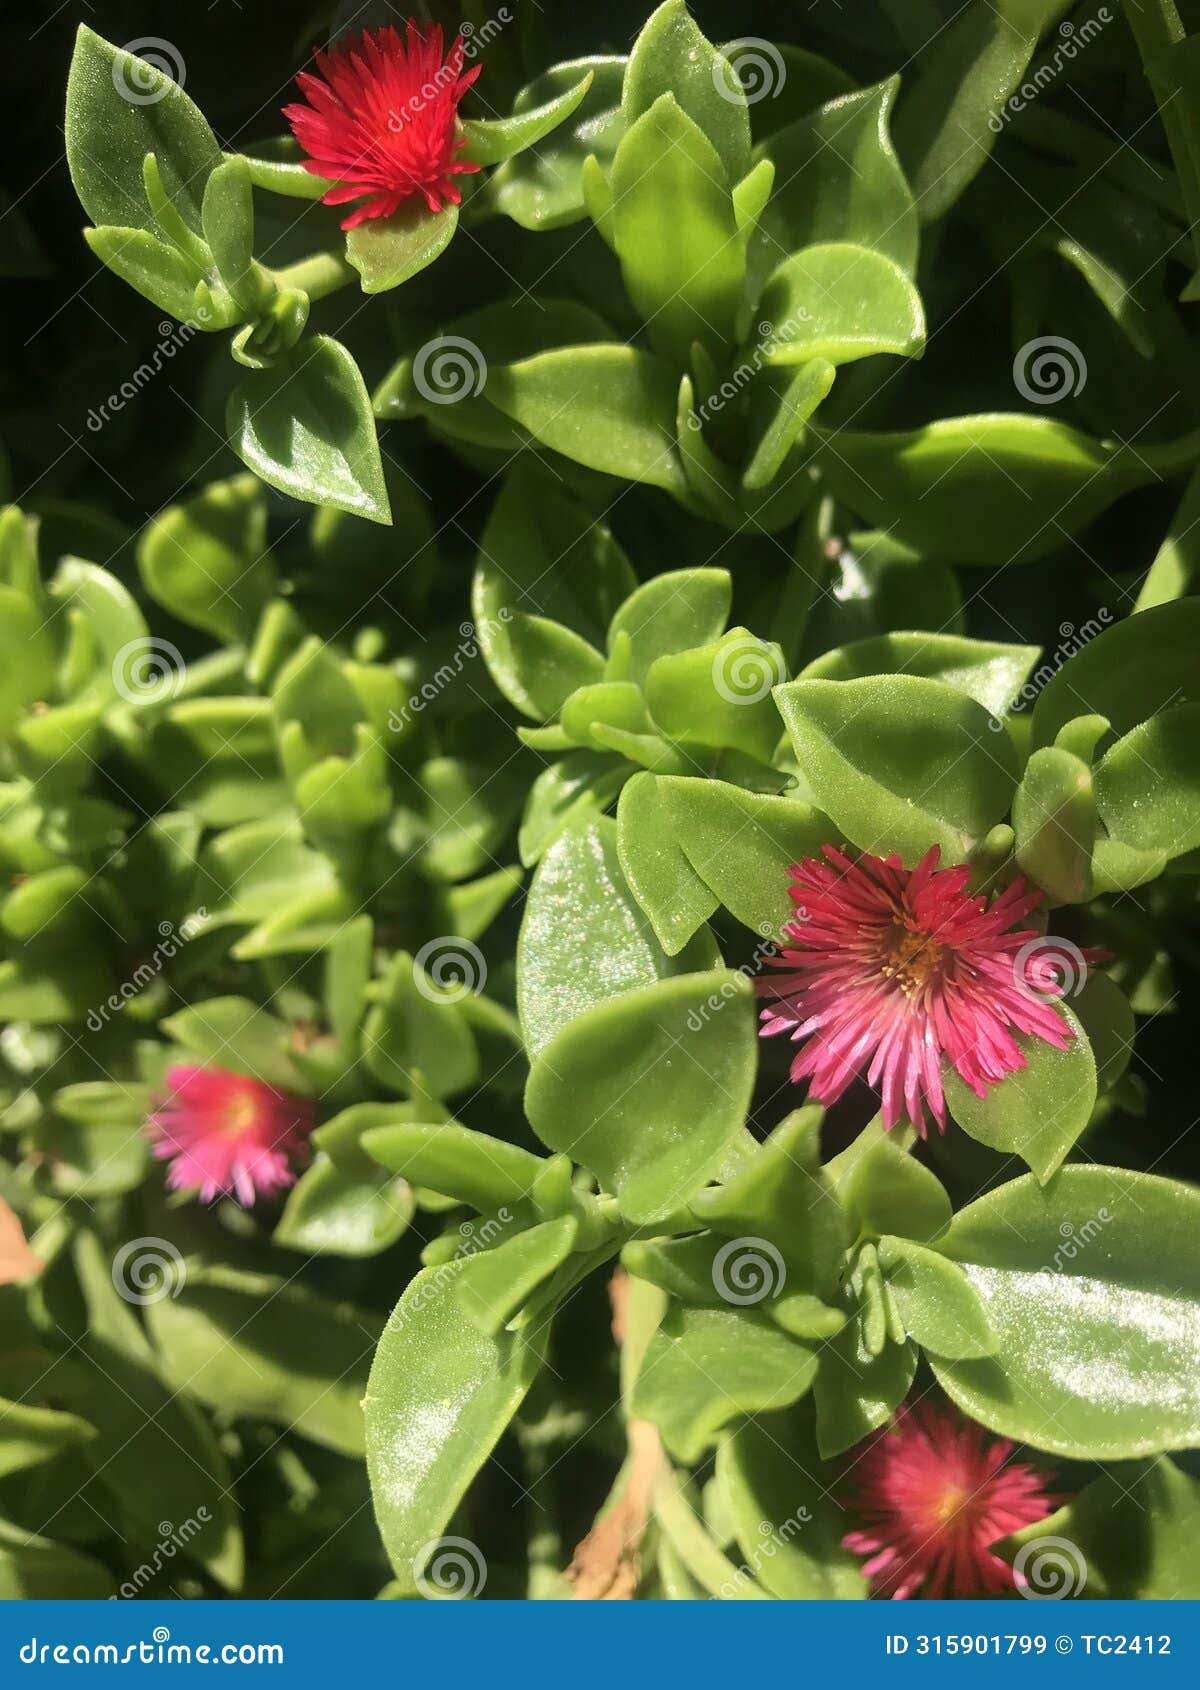 small red flowers of the plant aptenia cordifolia schwantes